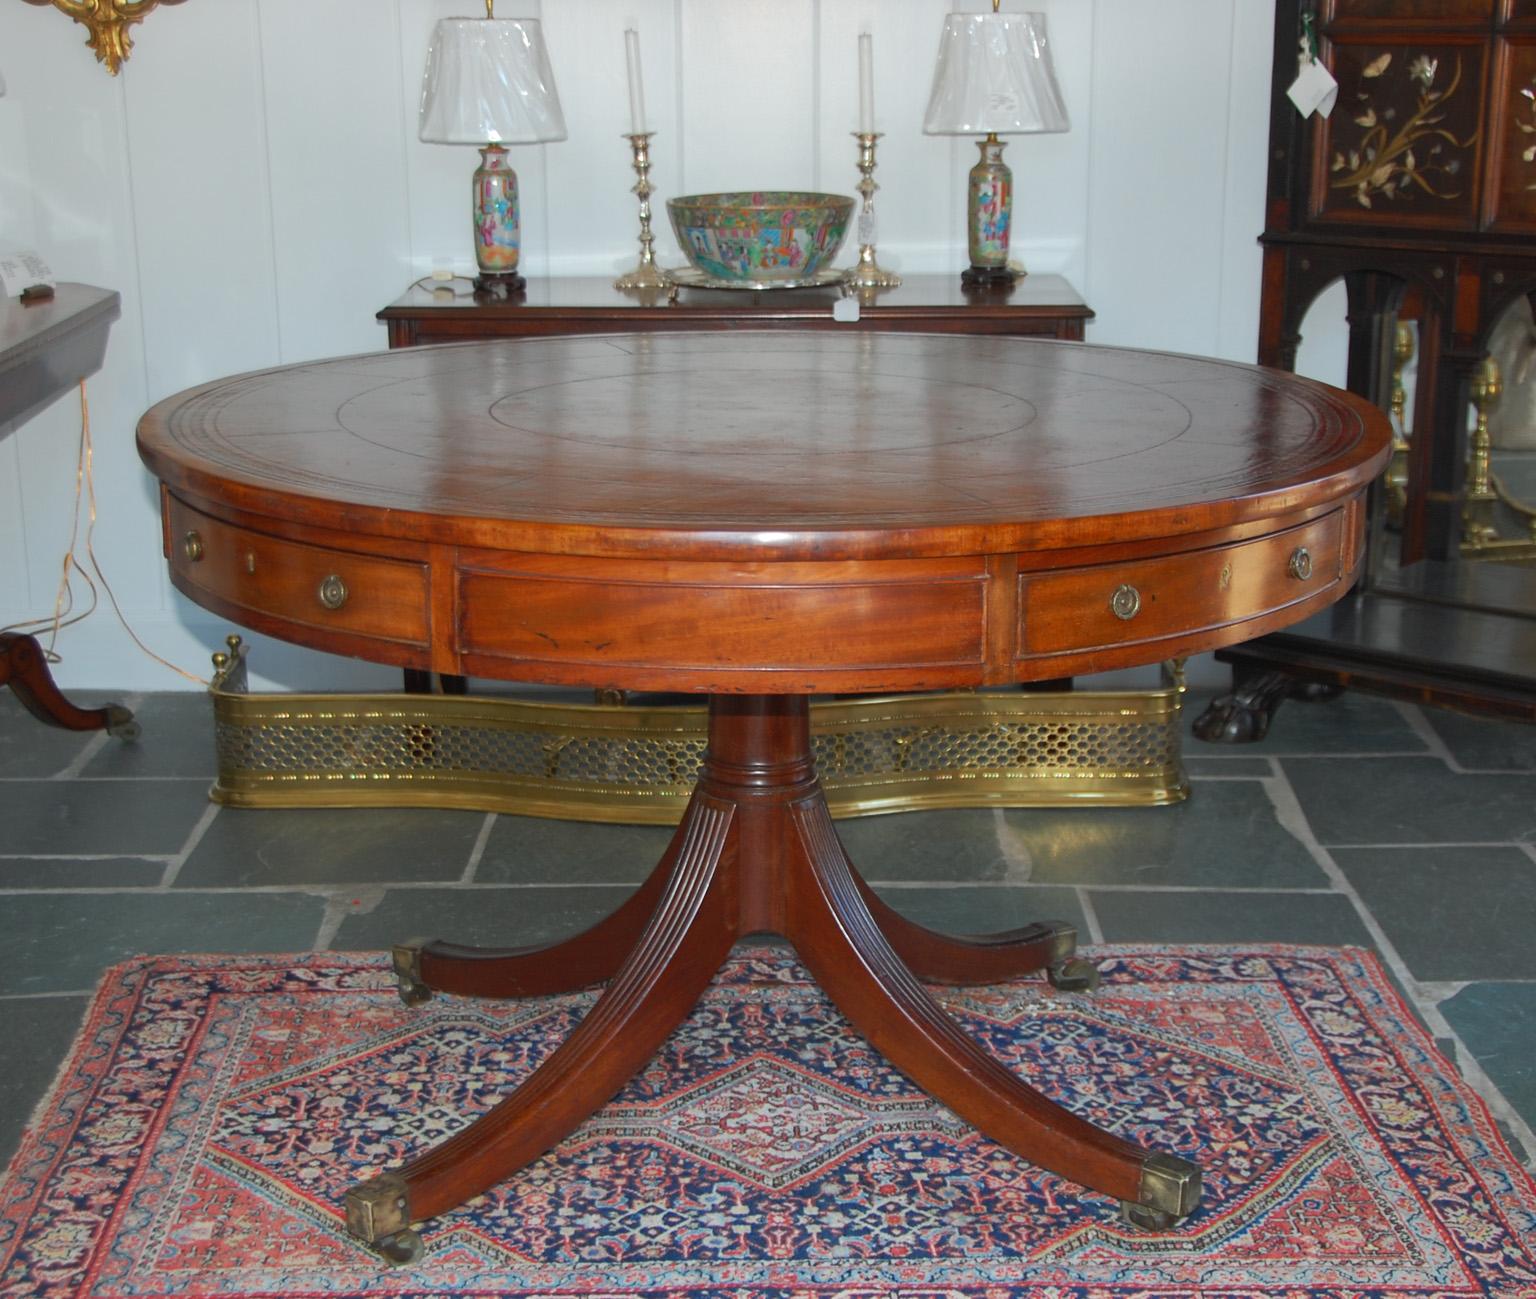 English Regency mahogany drum table with inset full hide hand tooled leather (the leather has been on this table for at least 100 years) . The frieze, with four working drawers and four dummy drawers, is supported by a center turned pedestal with